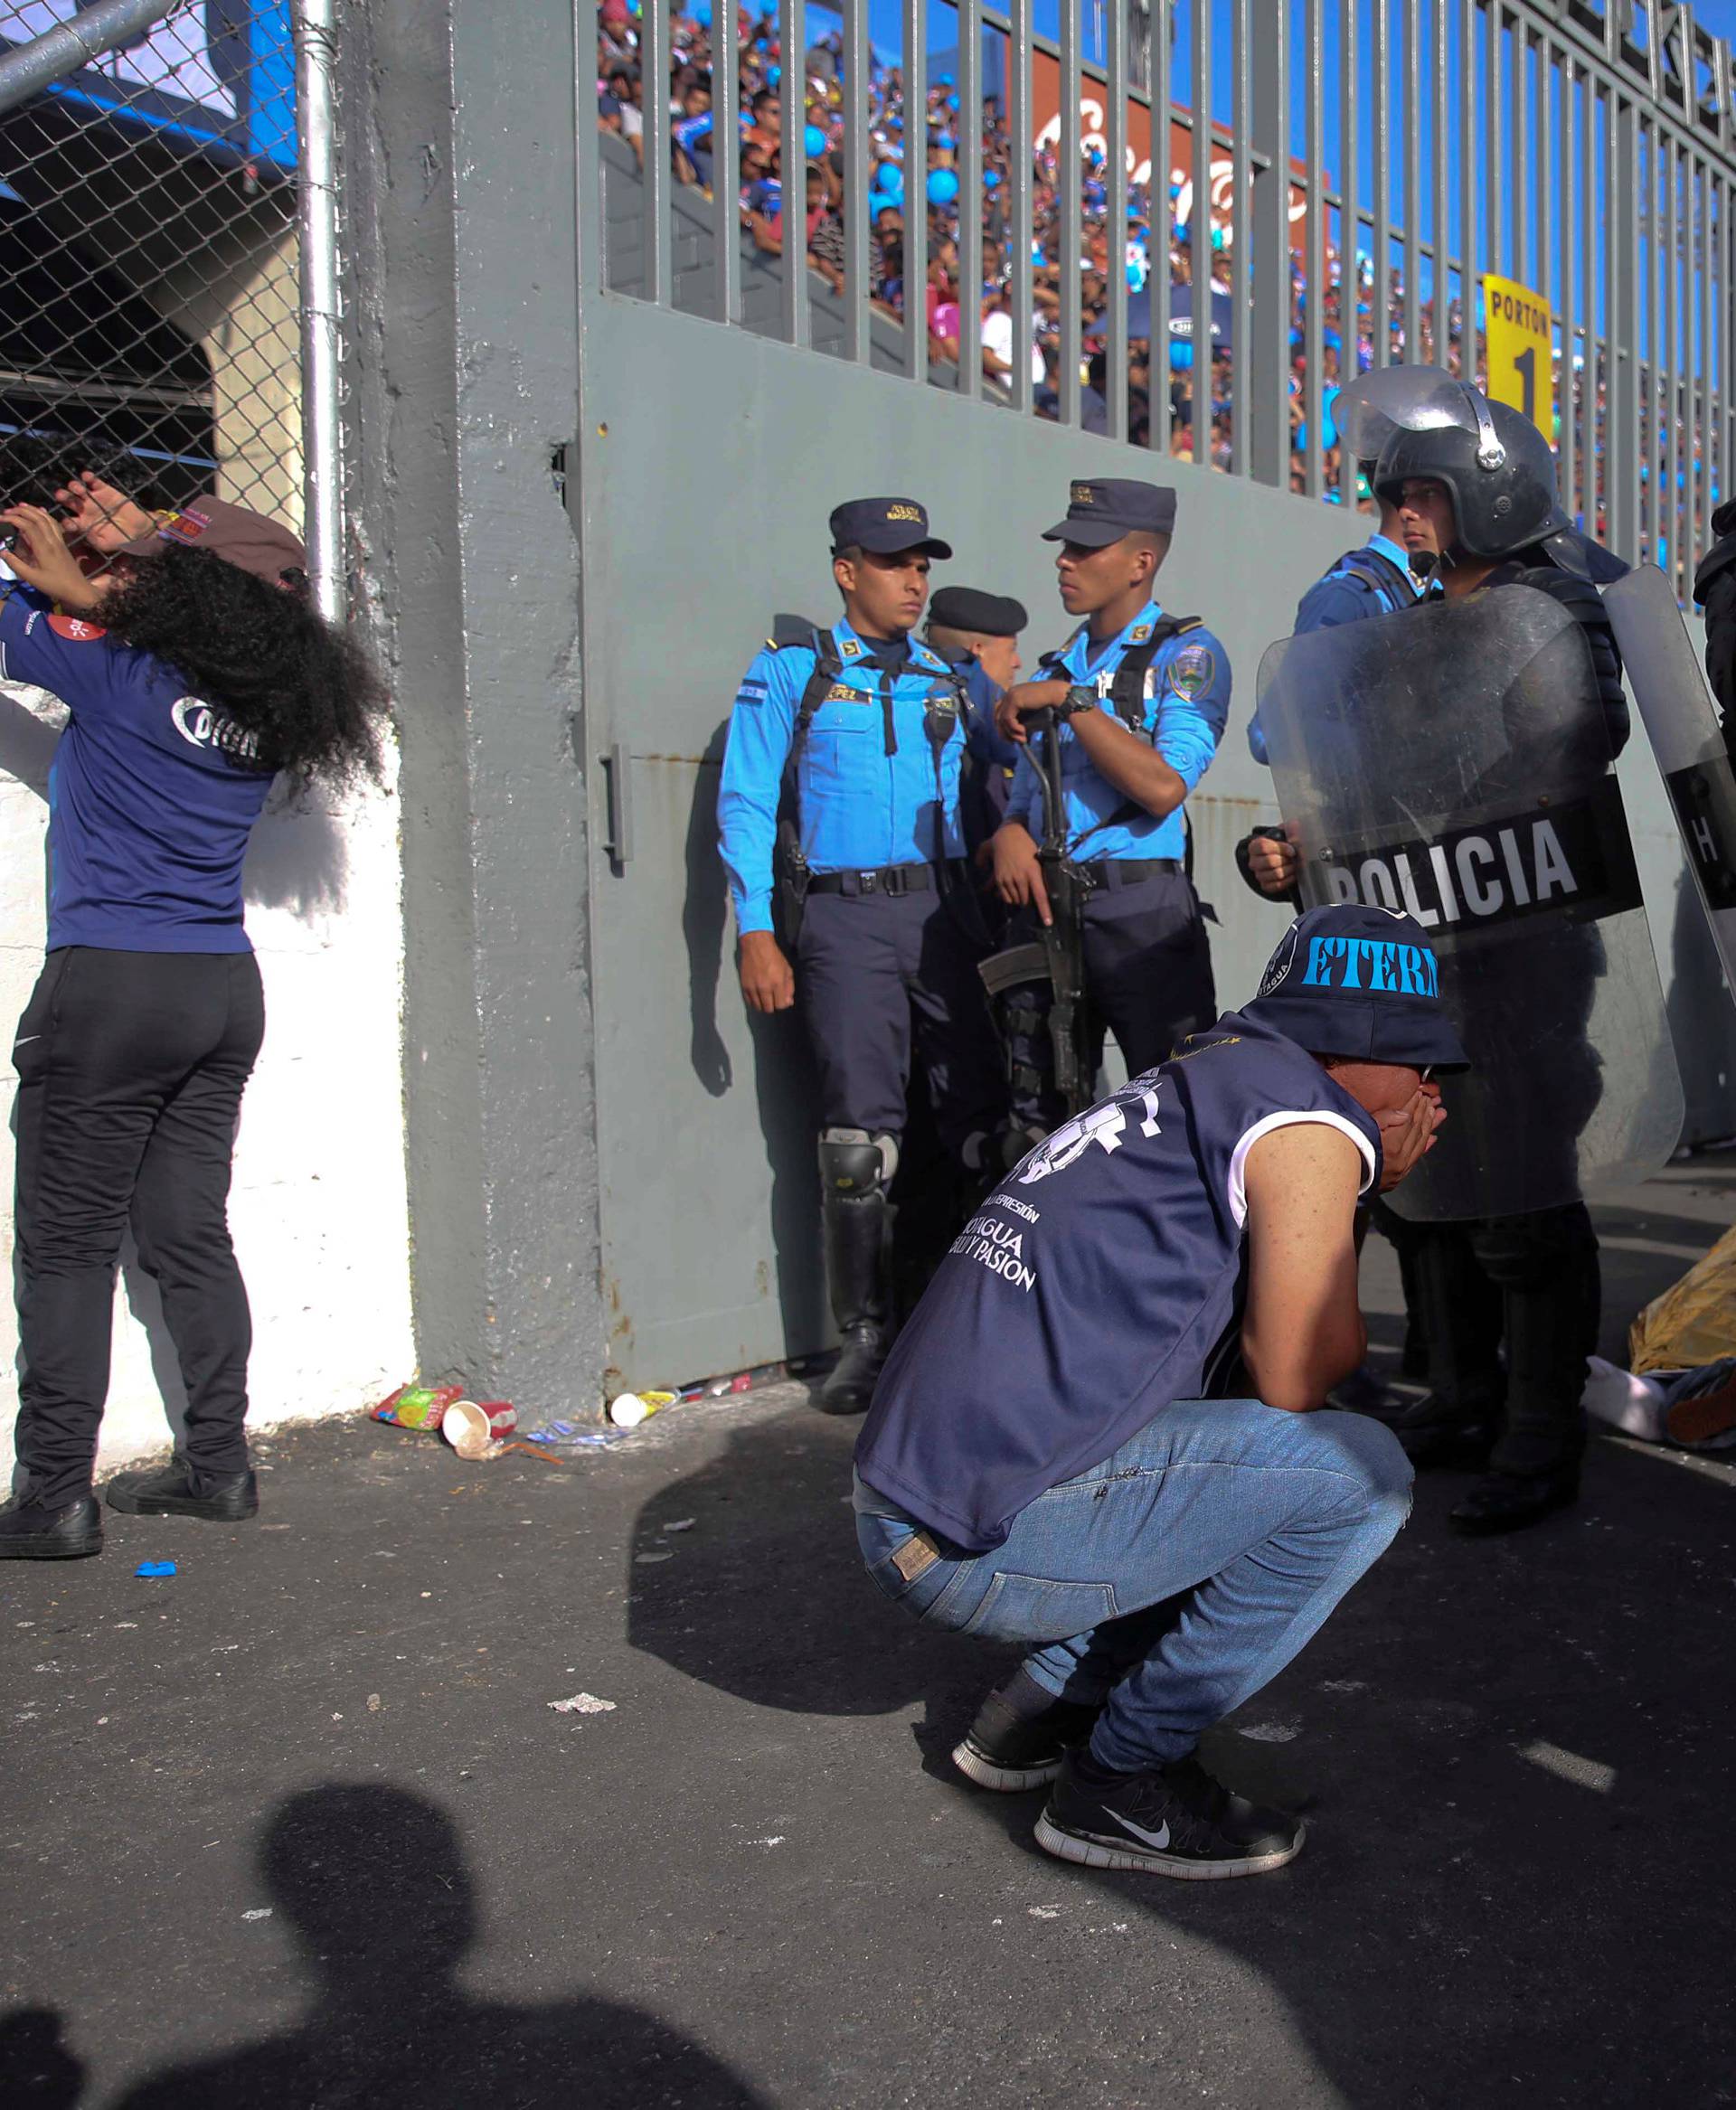 A man reacts after an stampede at the National Stadium in Tegucigalpa